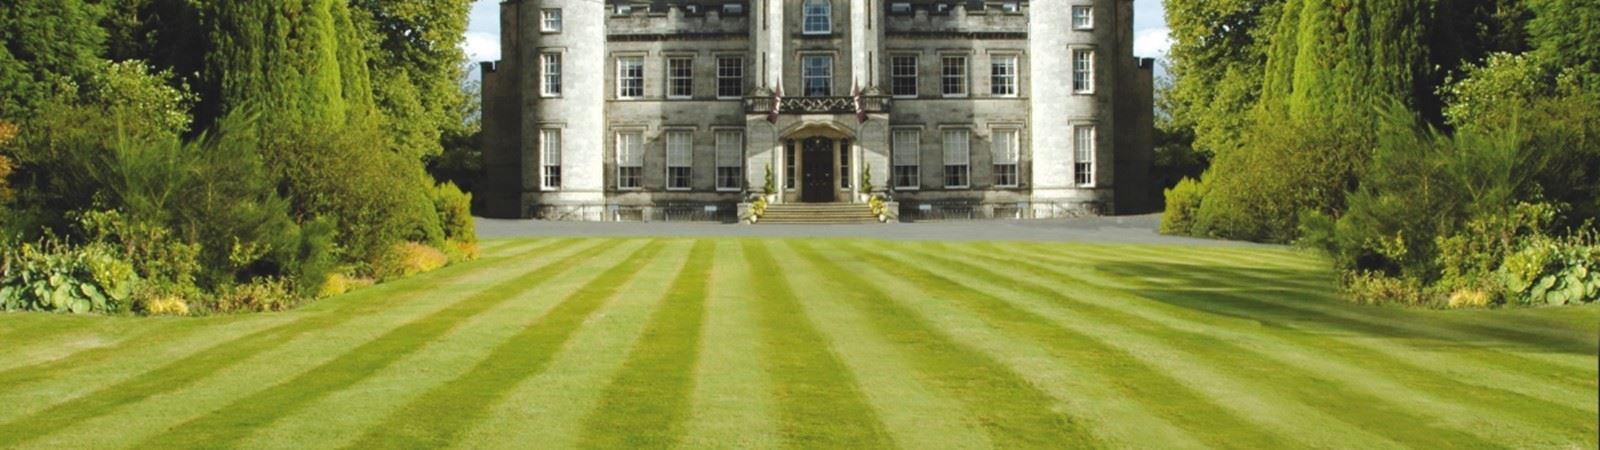 Airth Castle Hotel and Spa, Airth|Hotels in Falkirk 